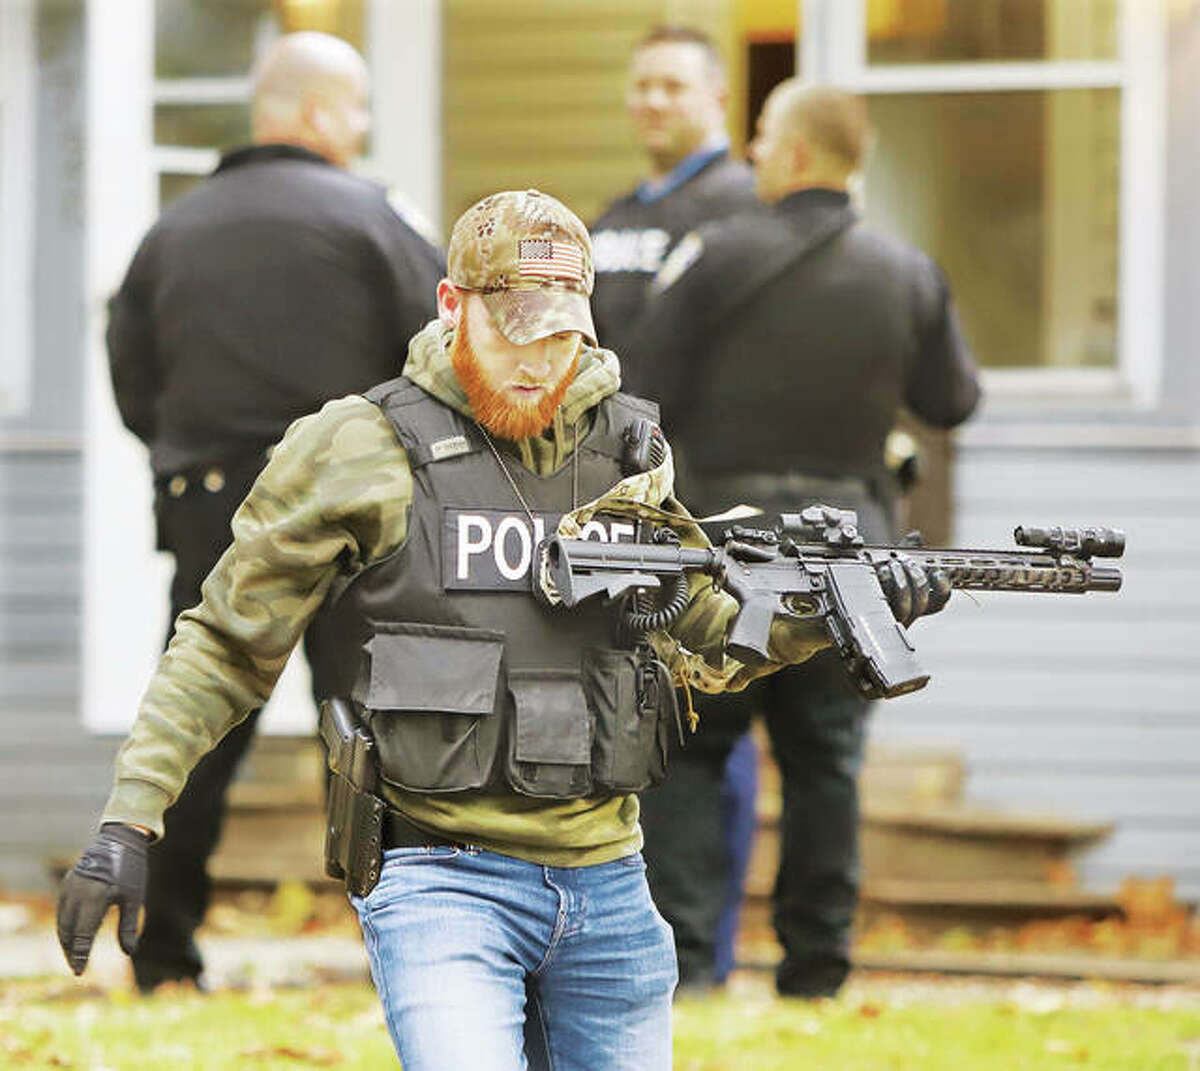 John Badman|The Telegraph Alton Police officers conducted a drug related search warrant Friday morning in the 2700 block of Walnut Street in Alton. Some of the officers were heavily armed with assault weapons and broke down the front door with a battering ram.